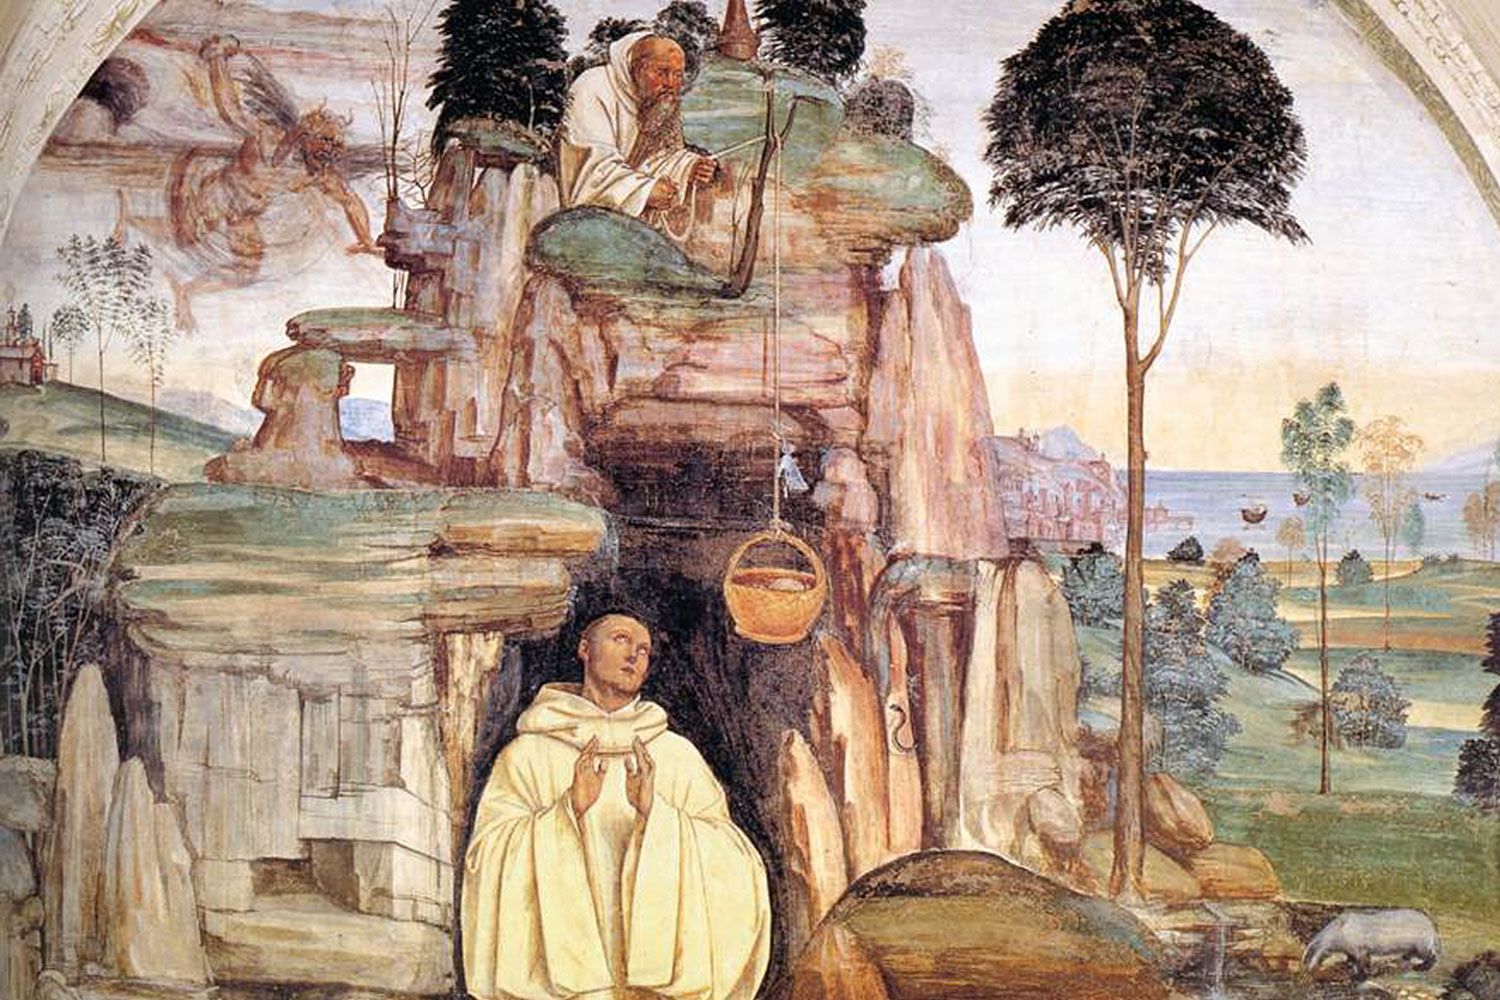 Sodoma’s fresco cycle of the Life of St Benedict, Scene 5: The Devil Destroys the Little Bell (1505-08). Located in the Abbey of Monteoliveto Maggiore near Siena. 